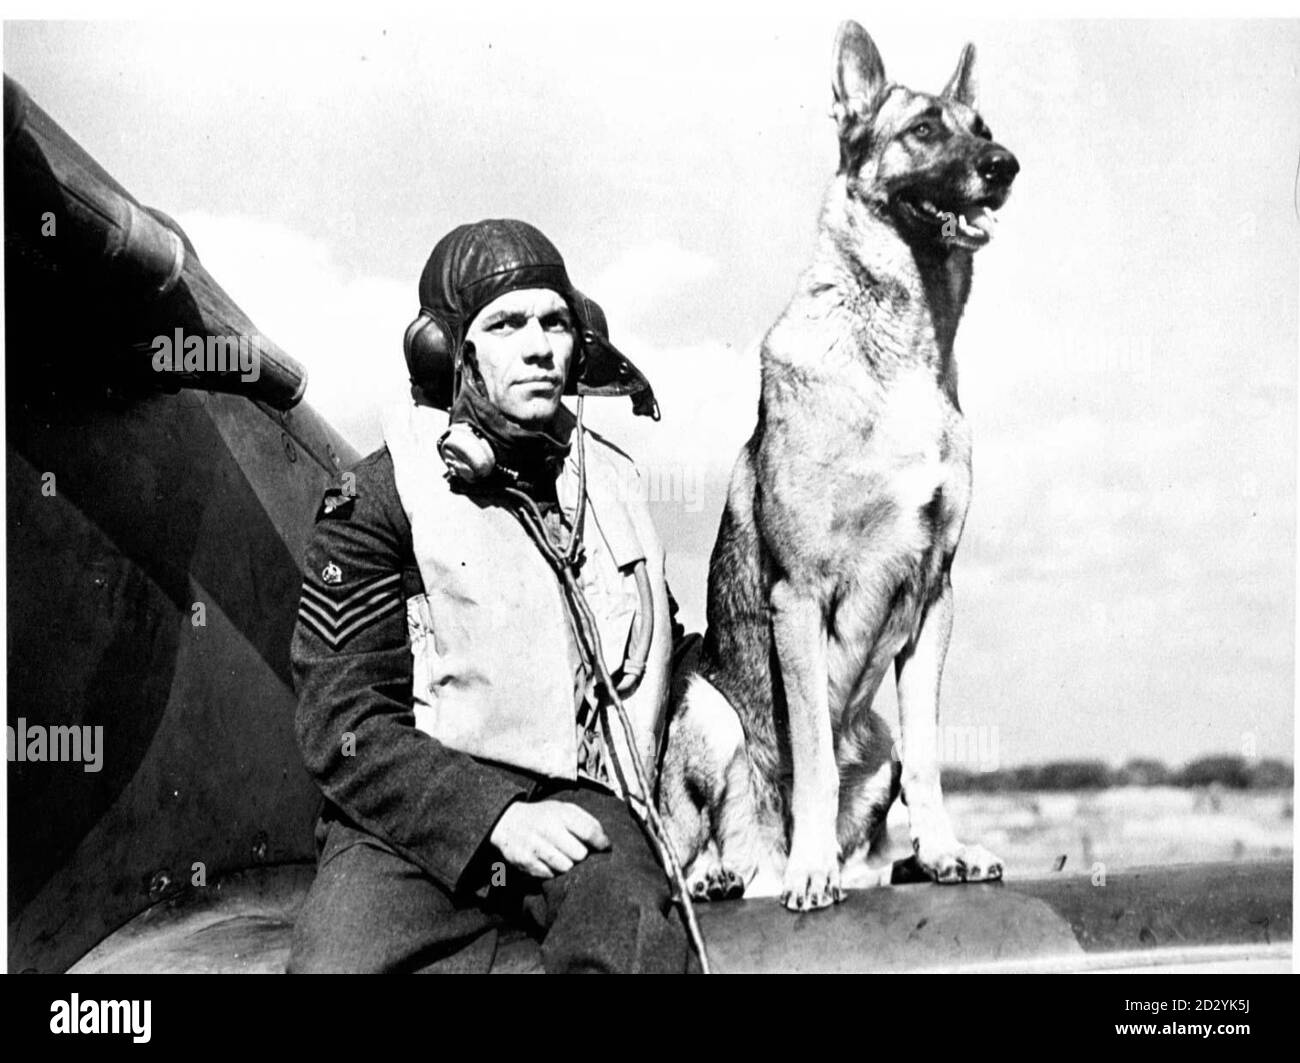 Collect photo of Wing Commander George Unwin during the Battle of Britain in 1940 with his dog 'Flash' posing by a Spitfire. Unwin is the only surviving member of 19 Squadron, the Original Spitfire Squadron. PA Photos. Stock Photo